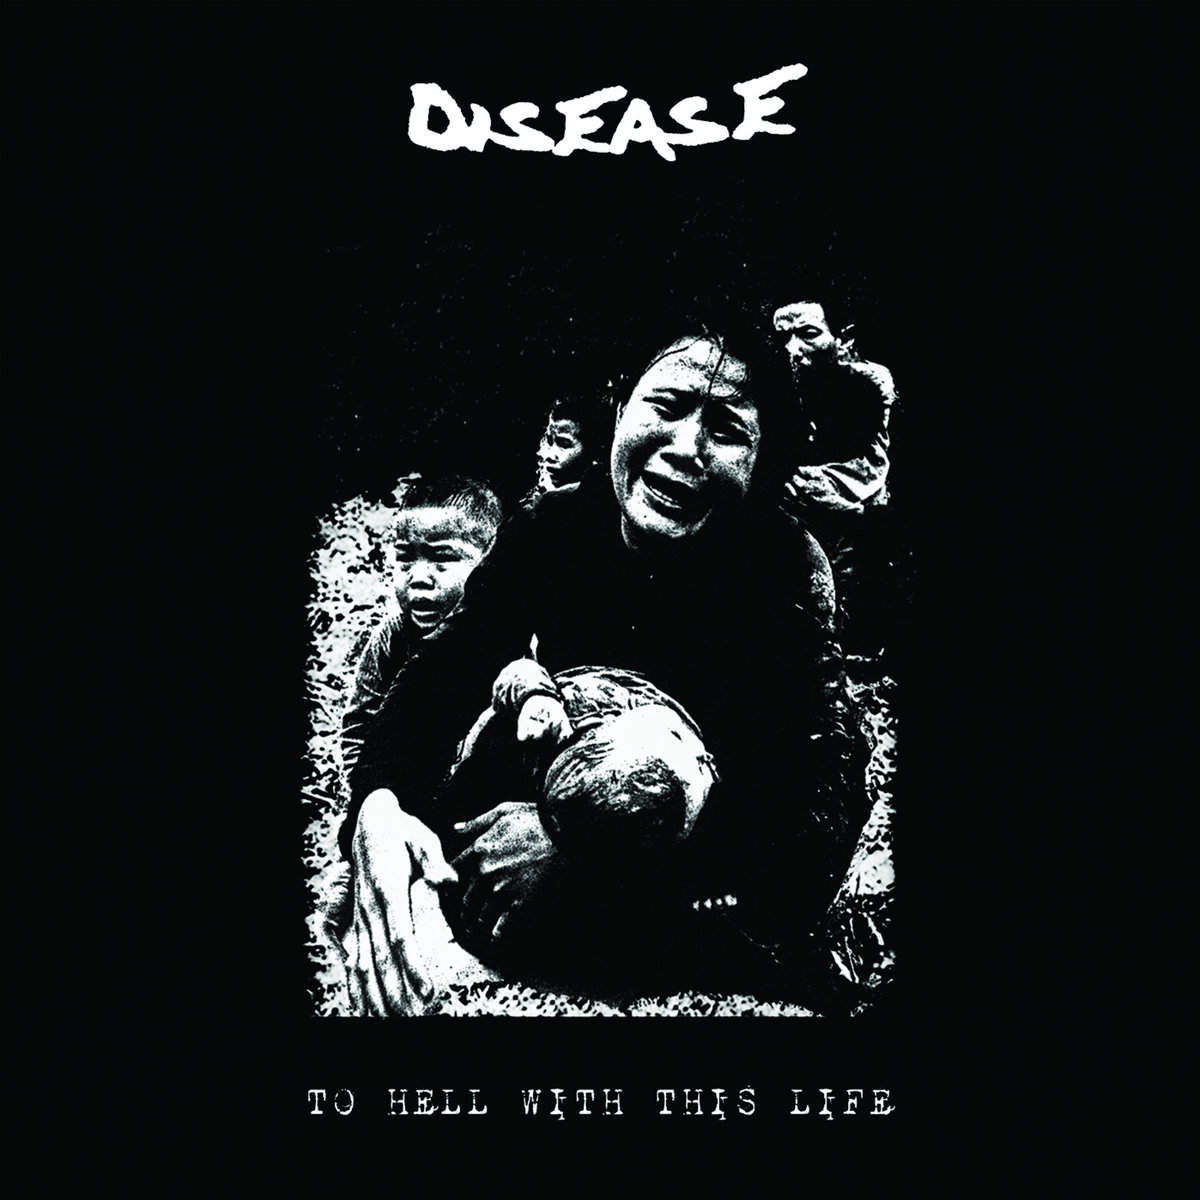 DISEASE - To hell with this life